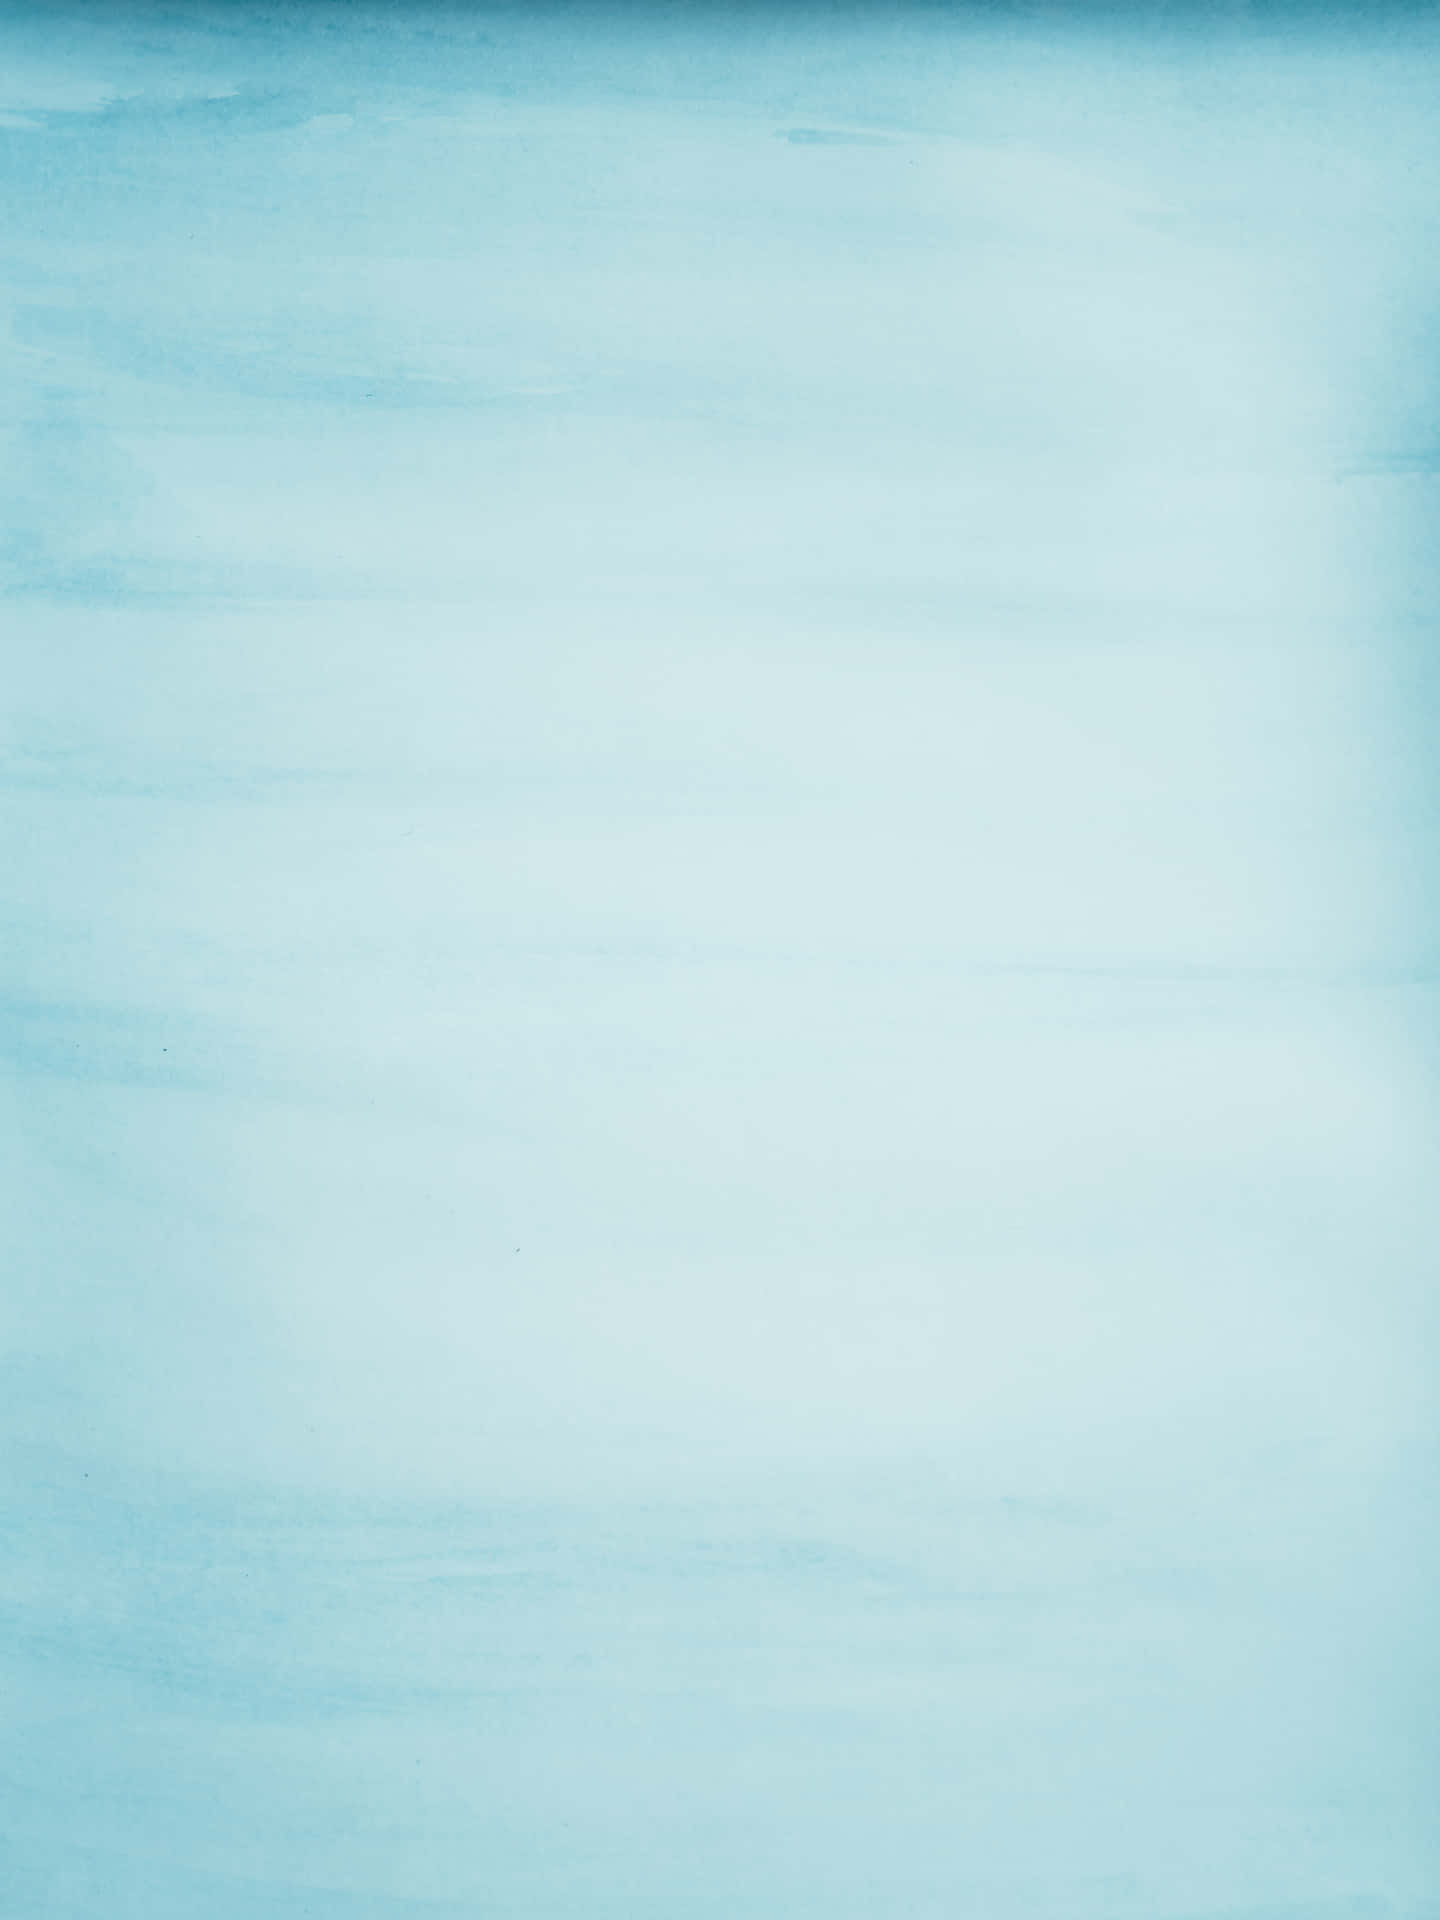 A Blue Watercolor Painting With A White Background